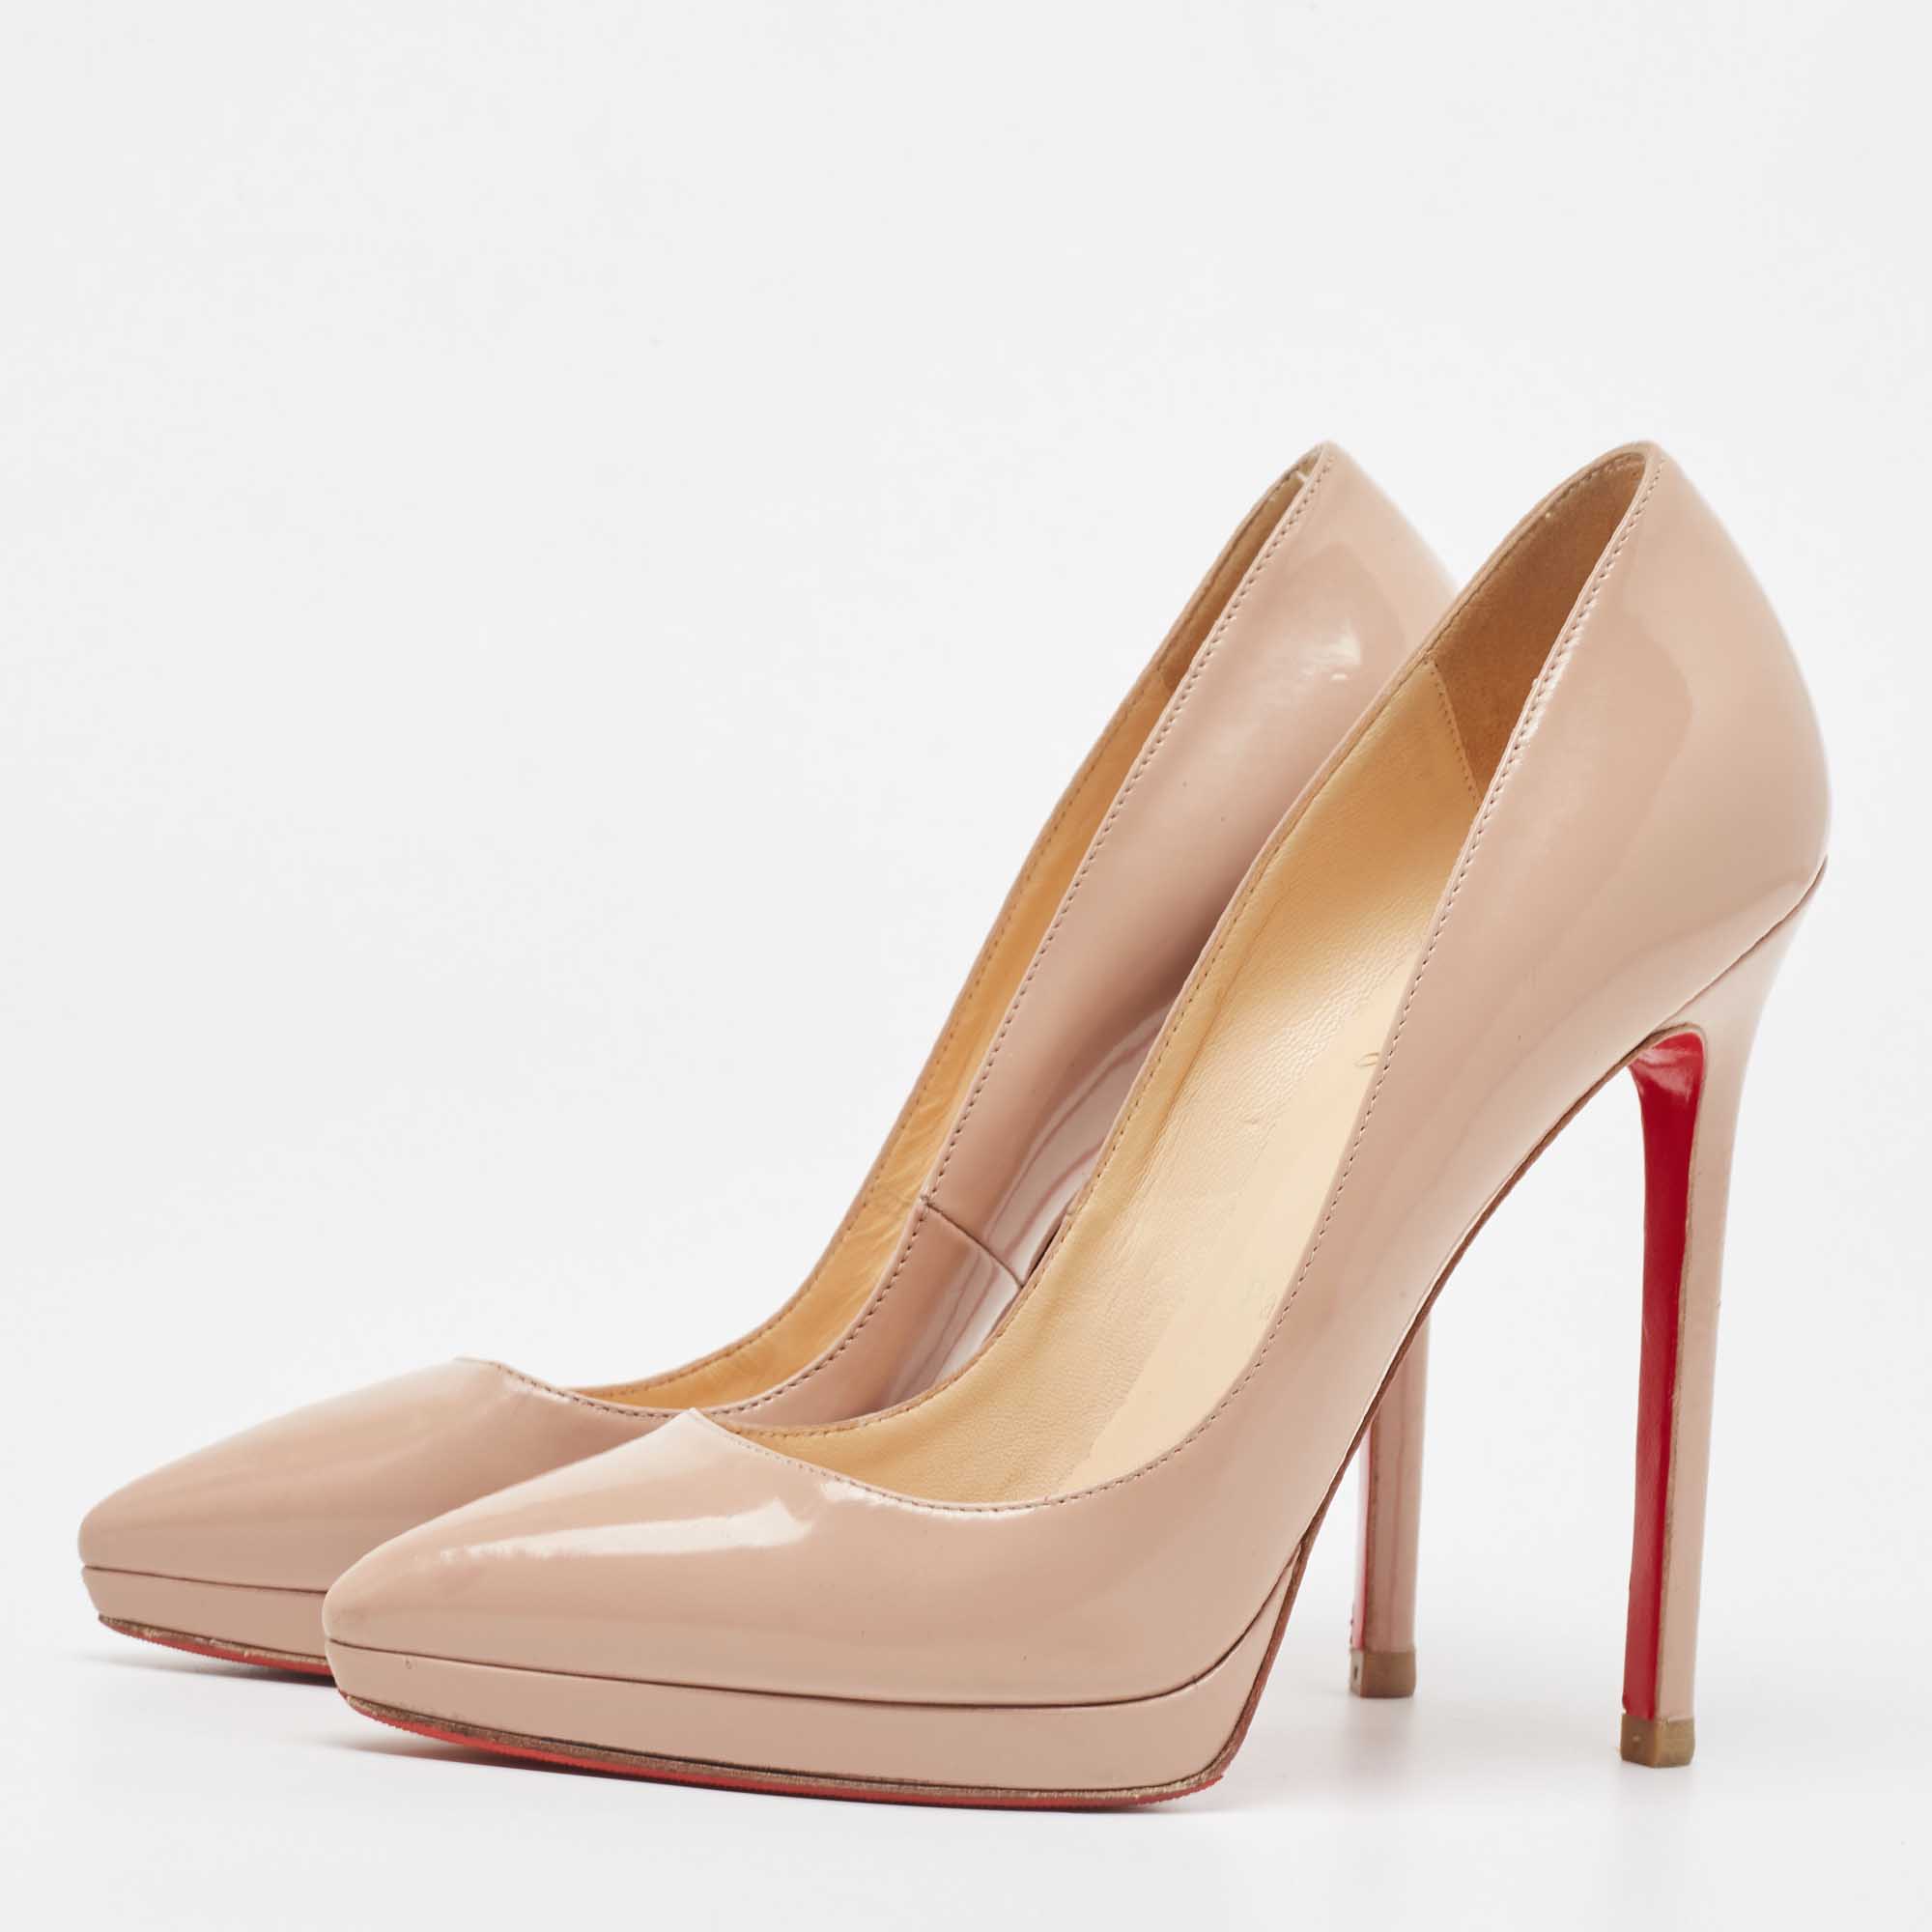 

Christian Louboutin Beige Patent Leather Pigalle Plato Pumps Size